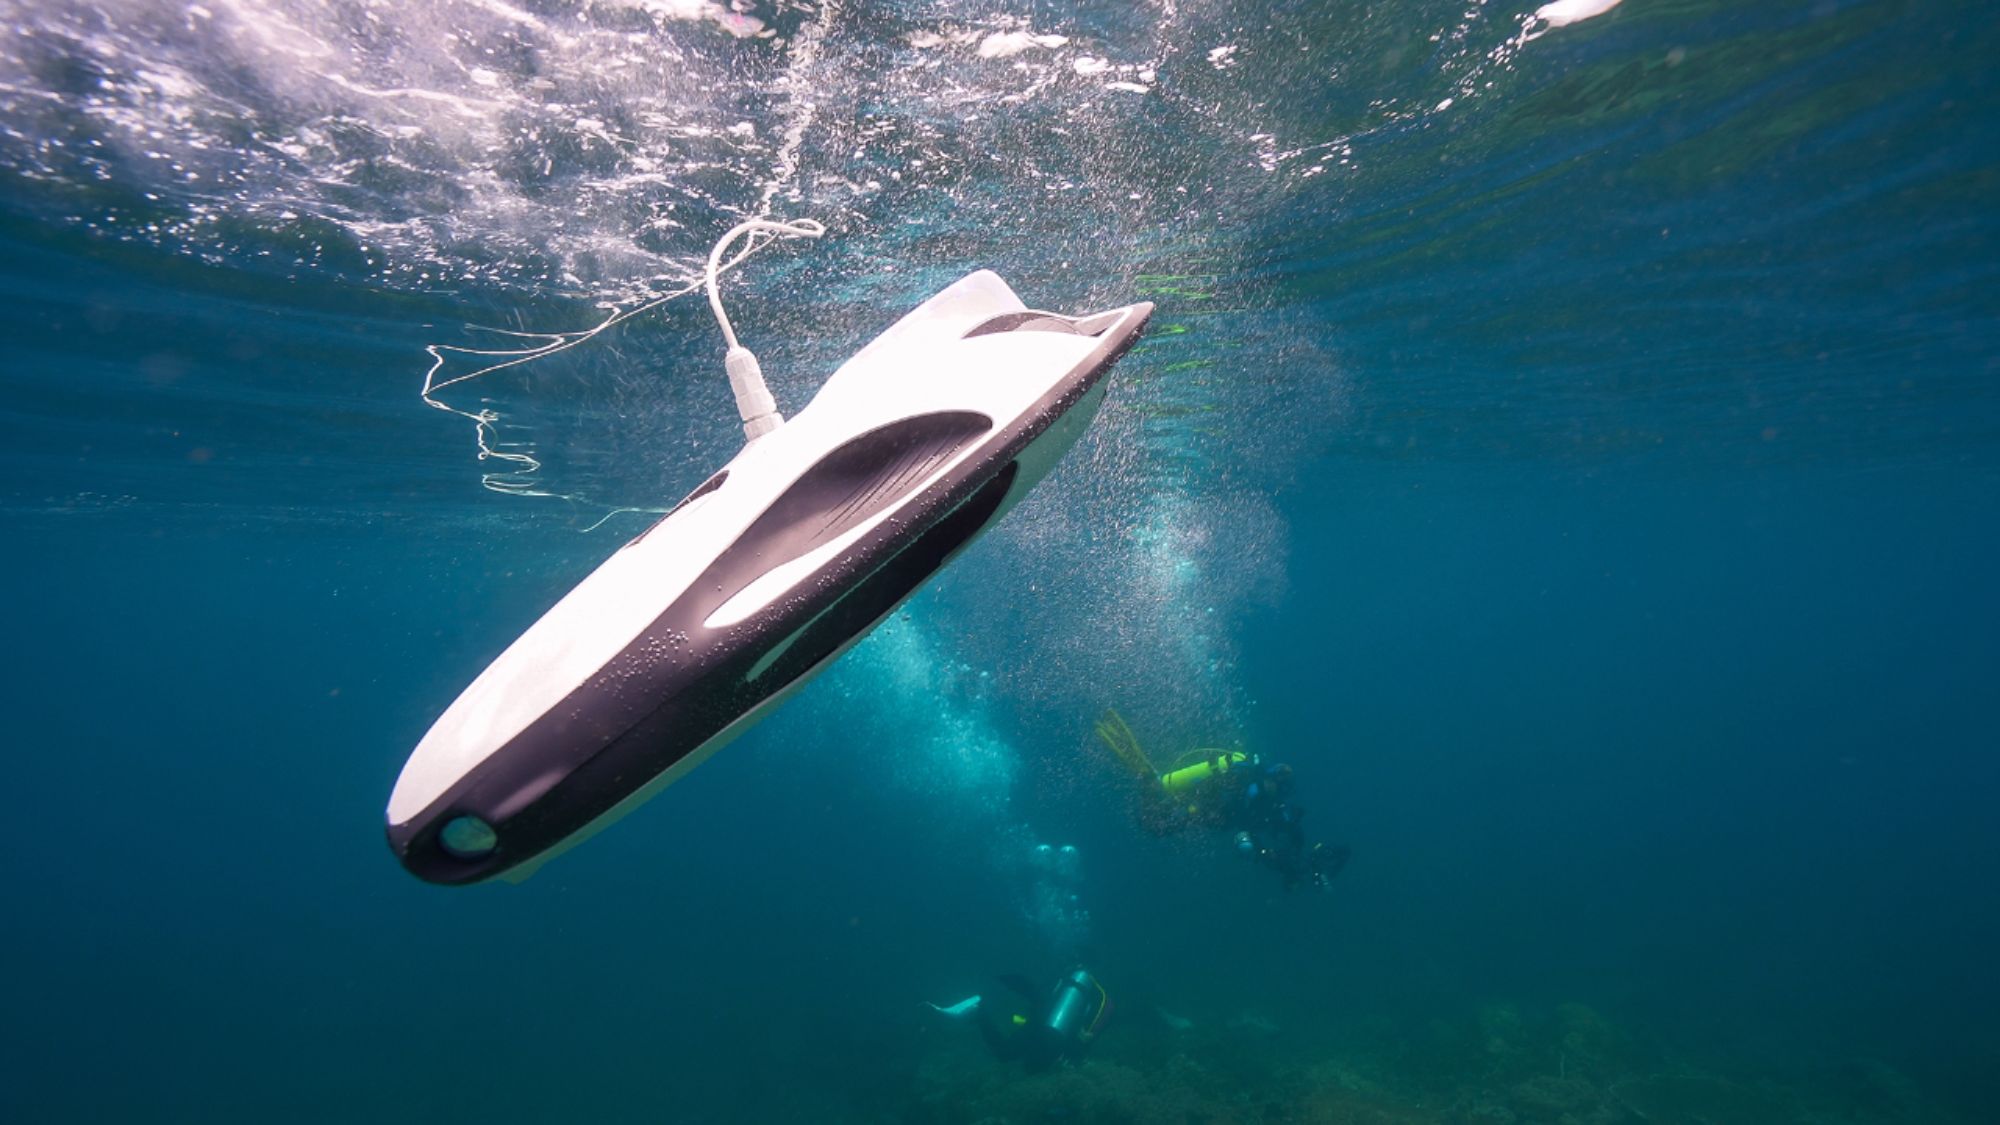 The PowerRay drone is an underwater camera - Reviewed